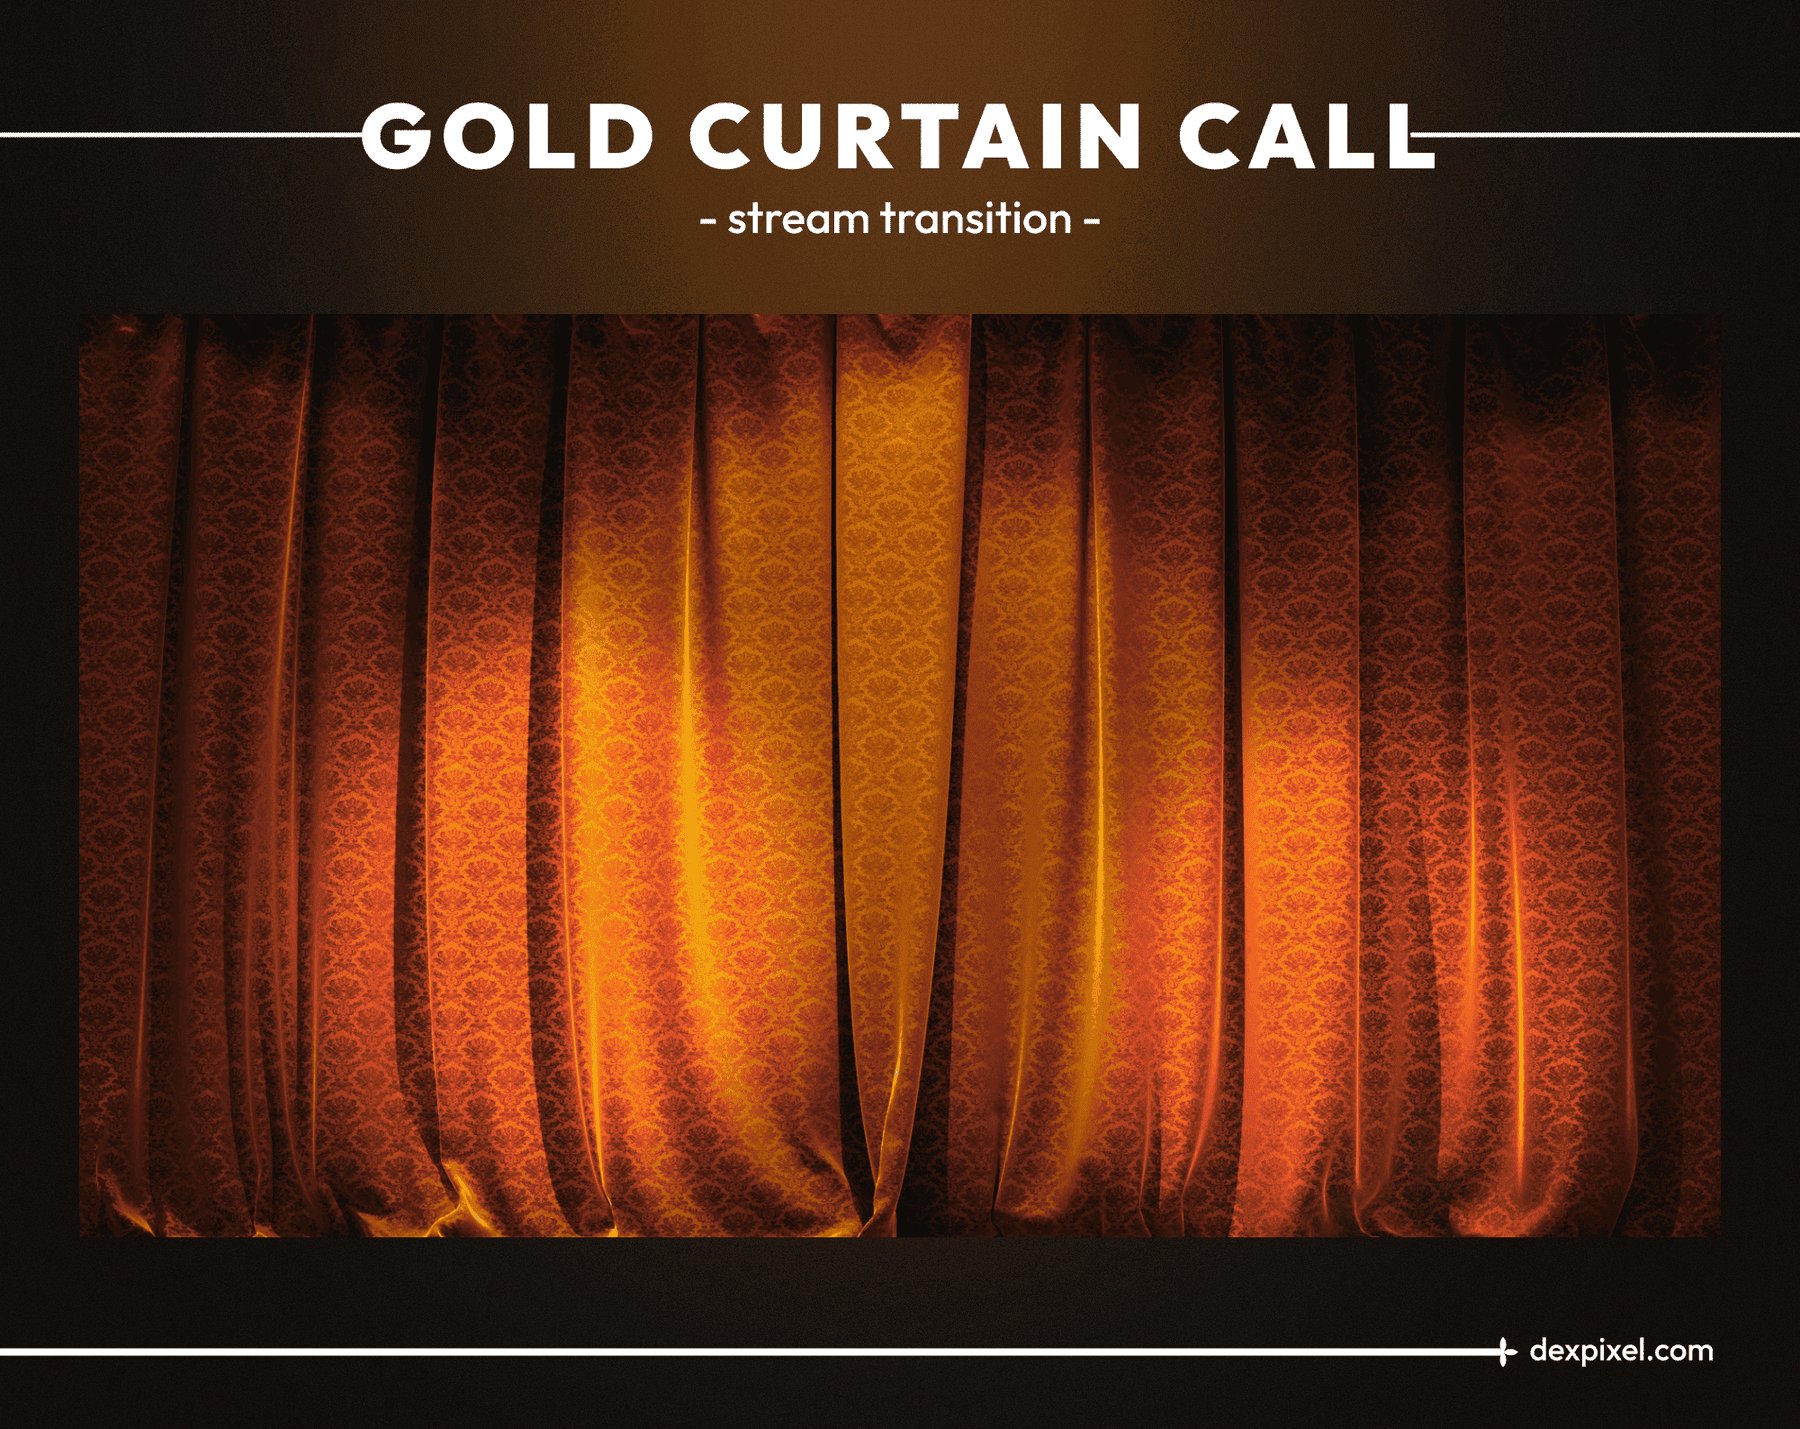 Gold Curtain Call Steam Transition 4